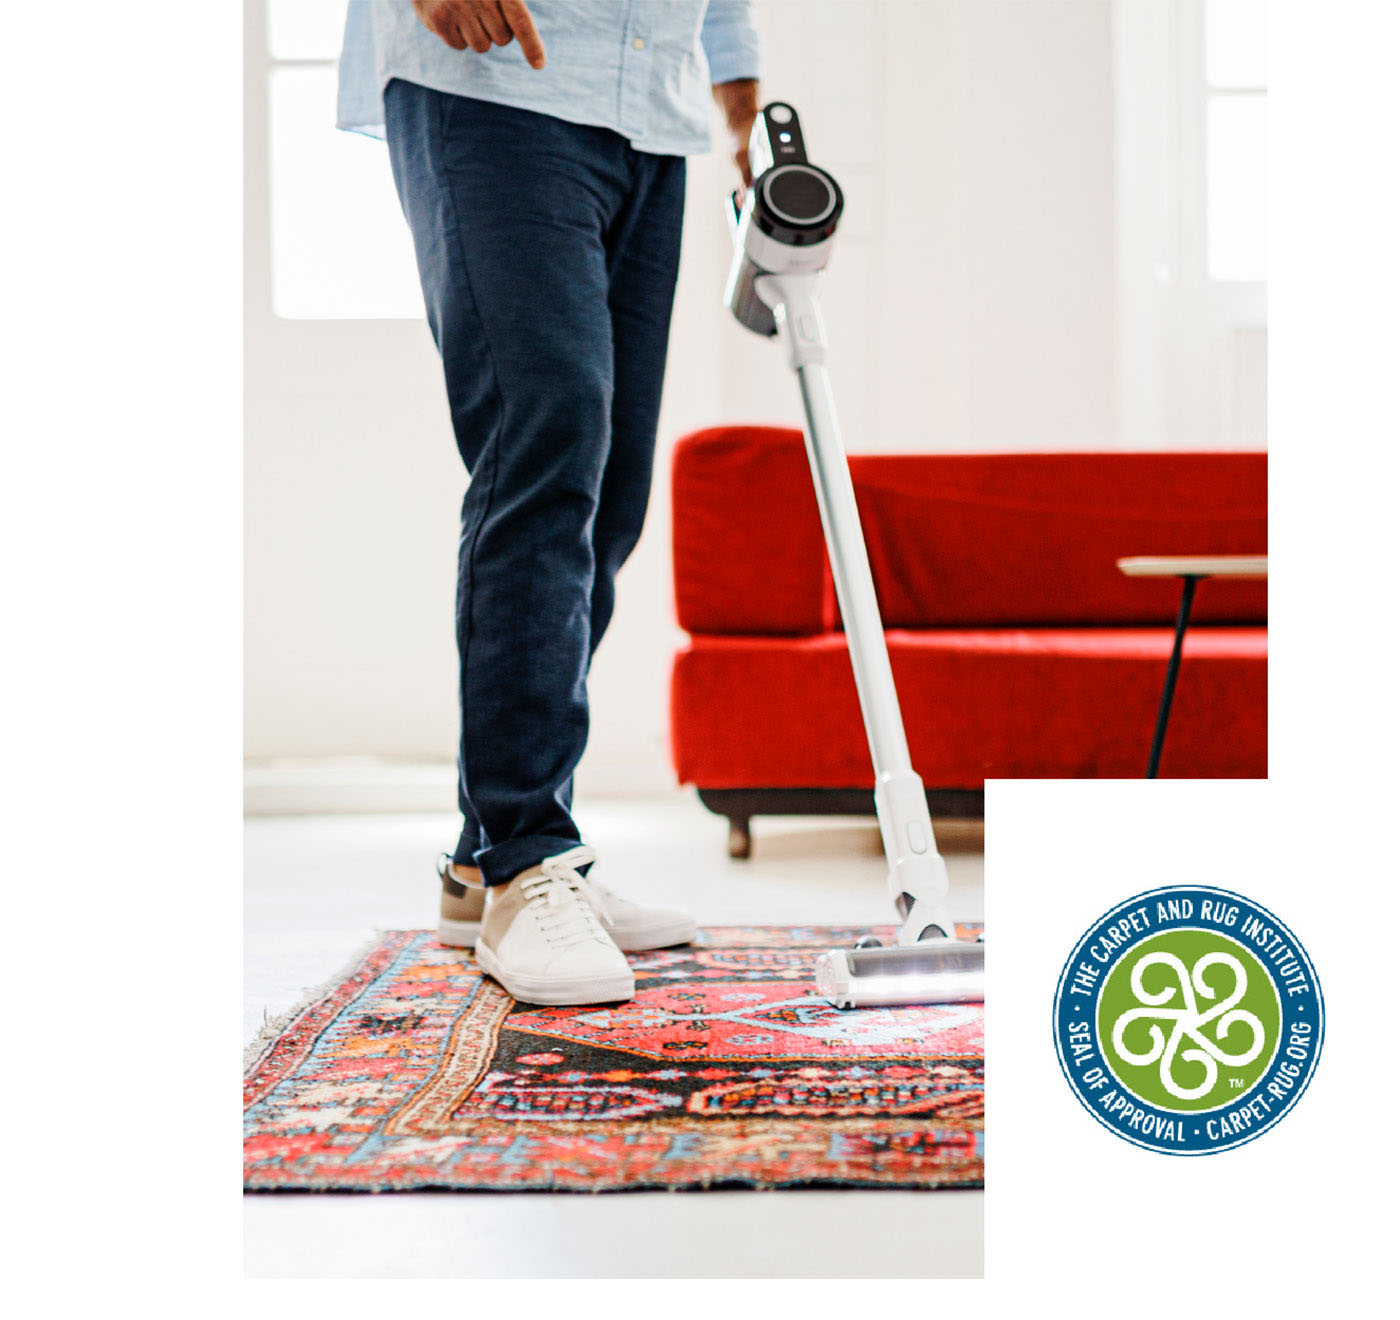 The Simple Green CARPET AND RUG INSTITUTE SEAL OF APPROVAL